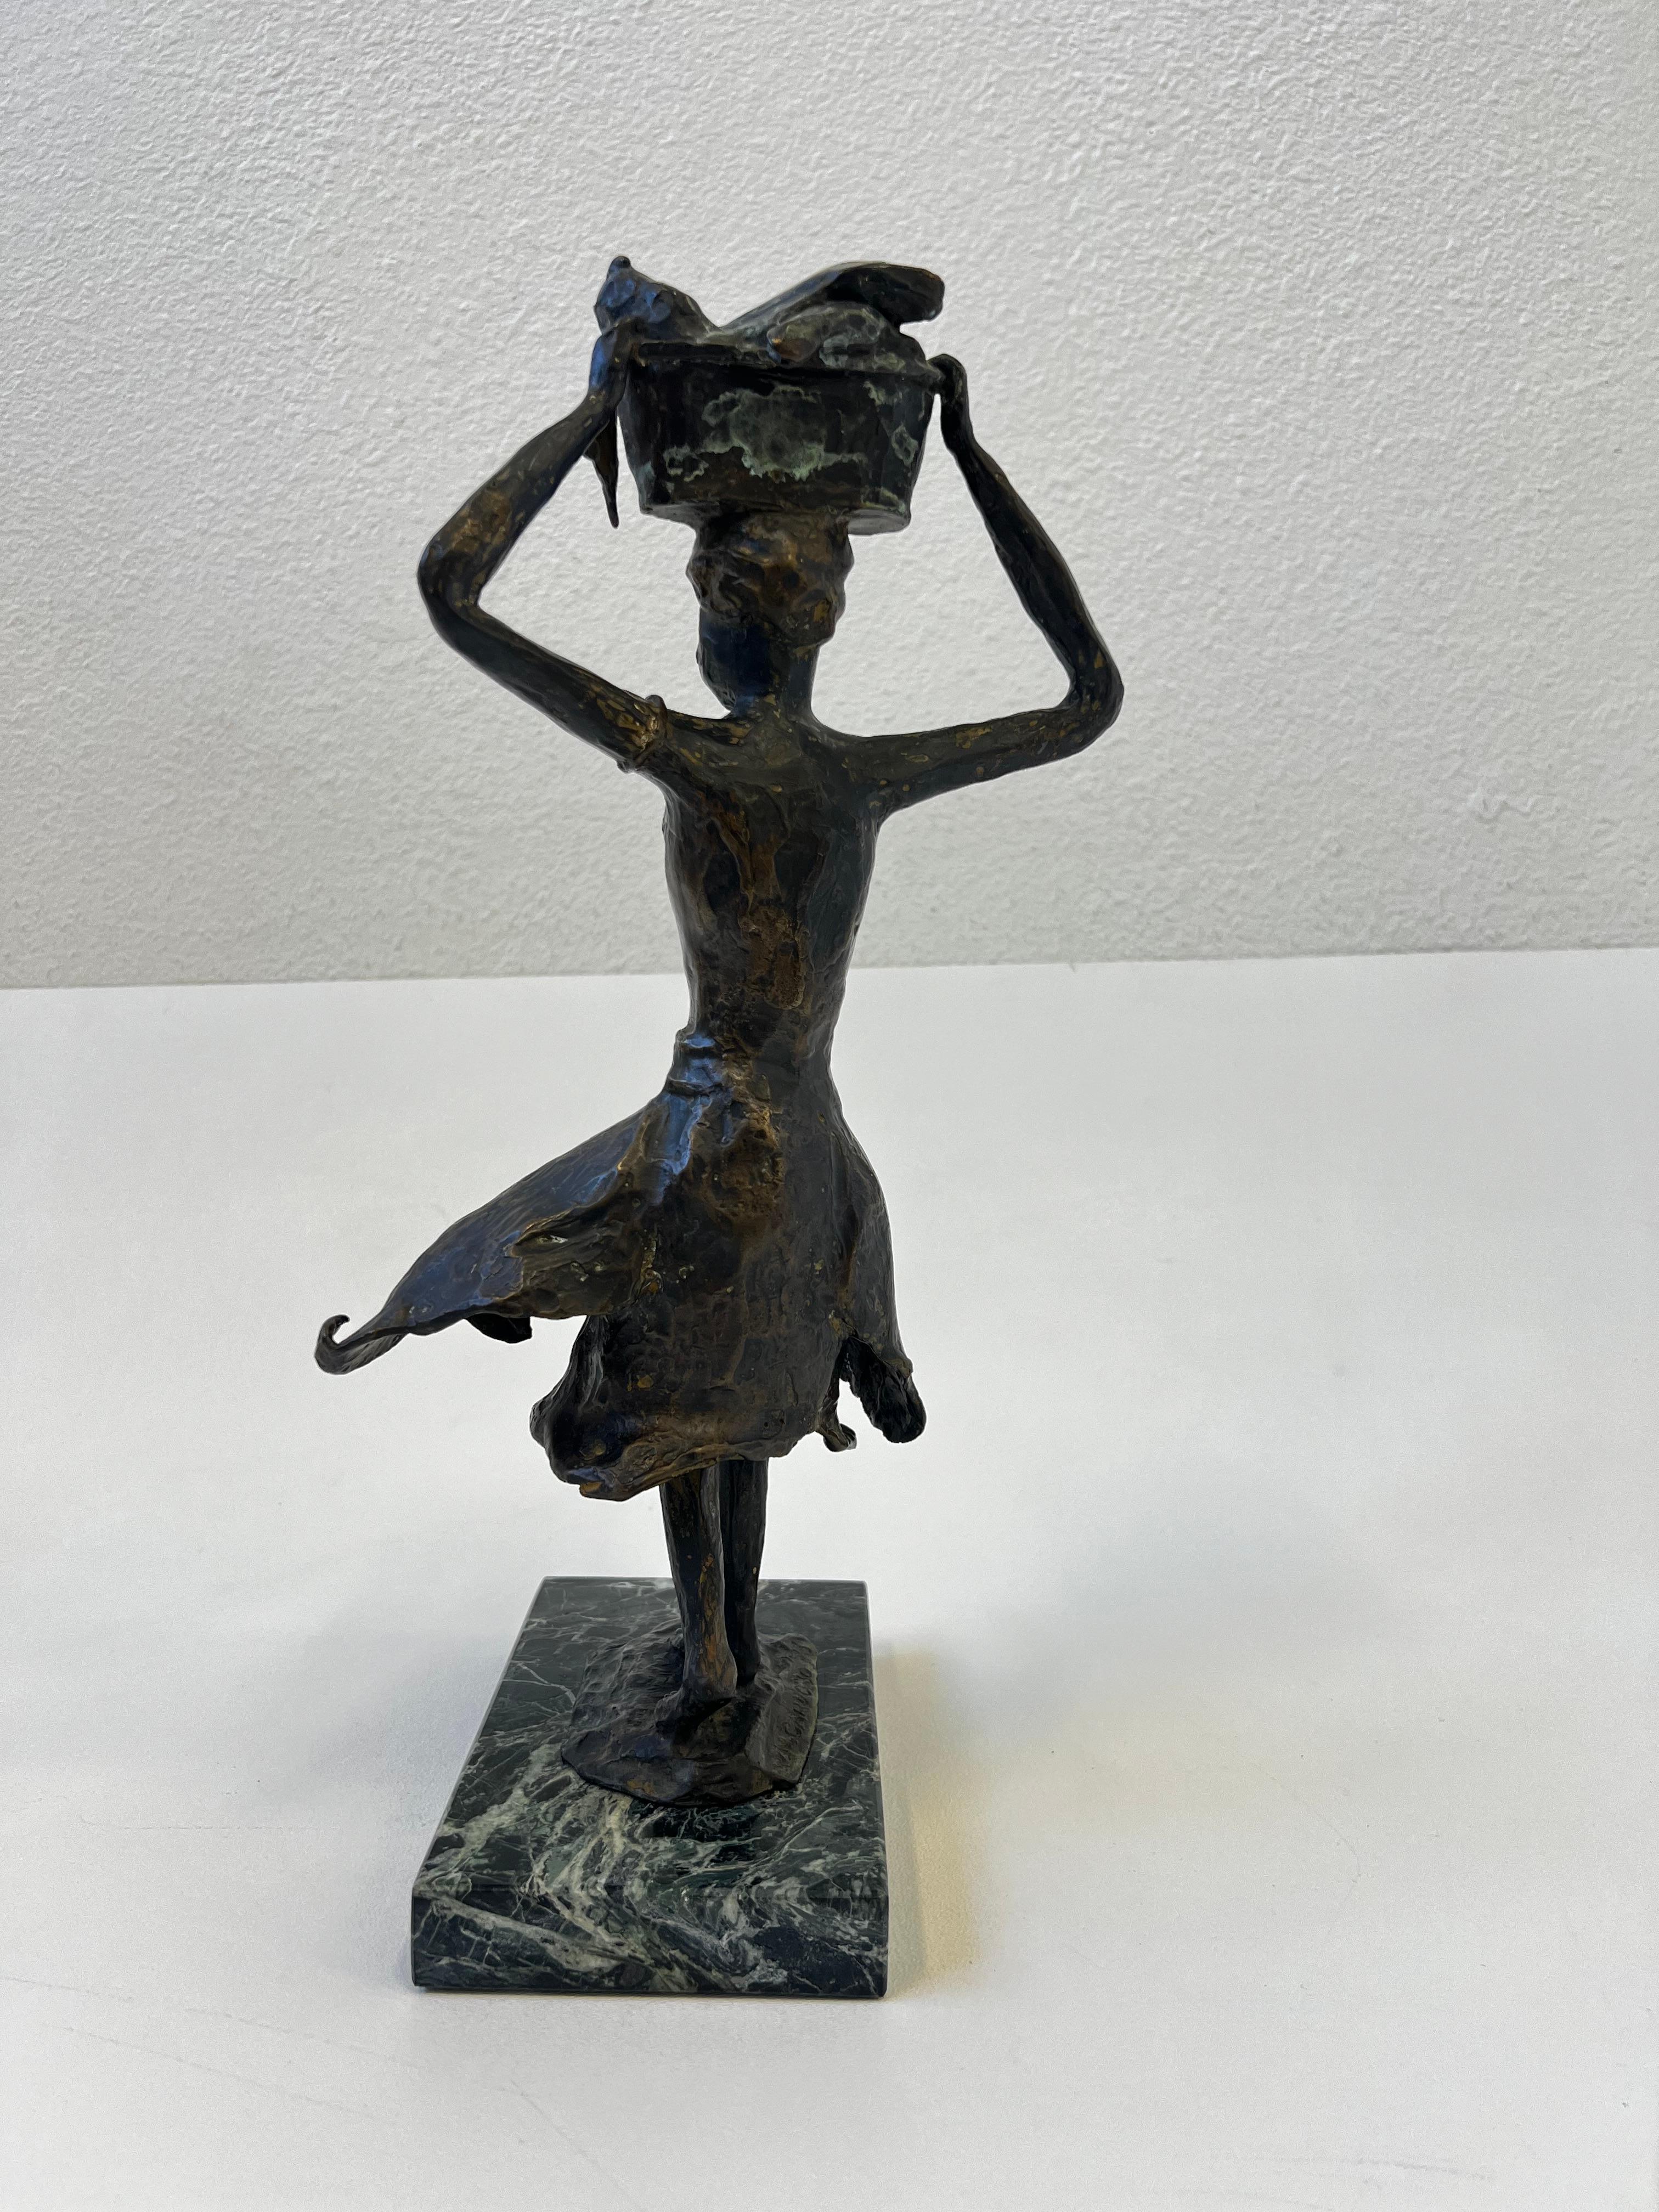 Hand-Crafted Spanish Women Cast Bronze Sculpture by W.N. Cardobo 1973 For Sale